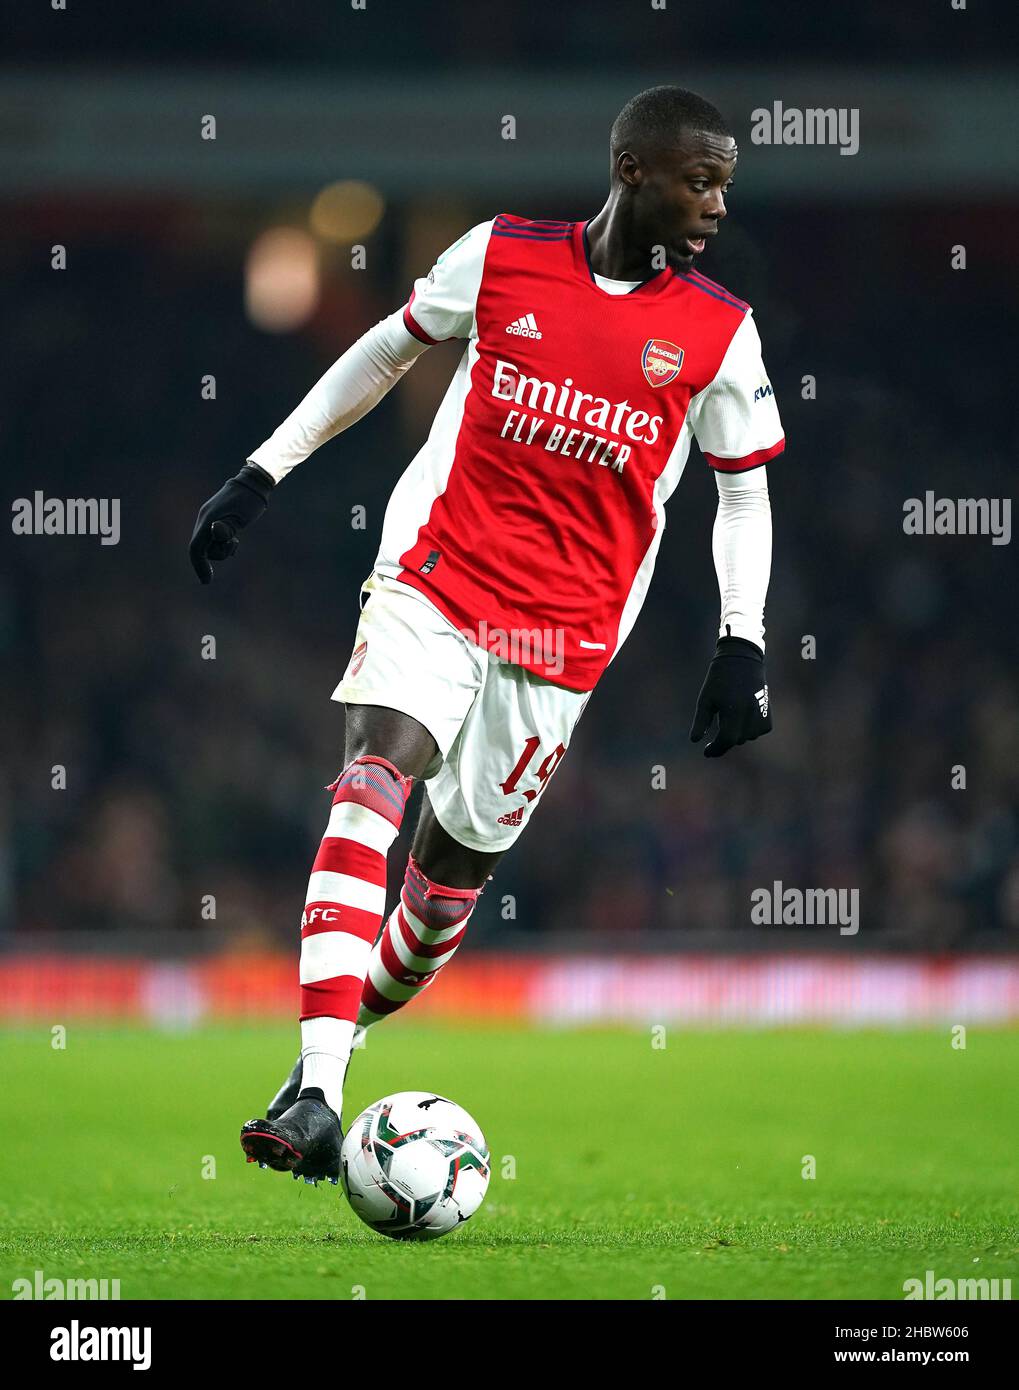 Arsenal's Nicolas Pepe in action during the Carabao Cup quarter final match  at the Emirates Stadium, London. Picture date: Tuesday December 21, 2021  Stock Photo - Alamy